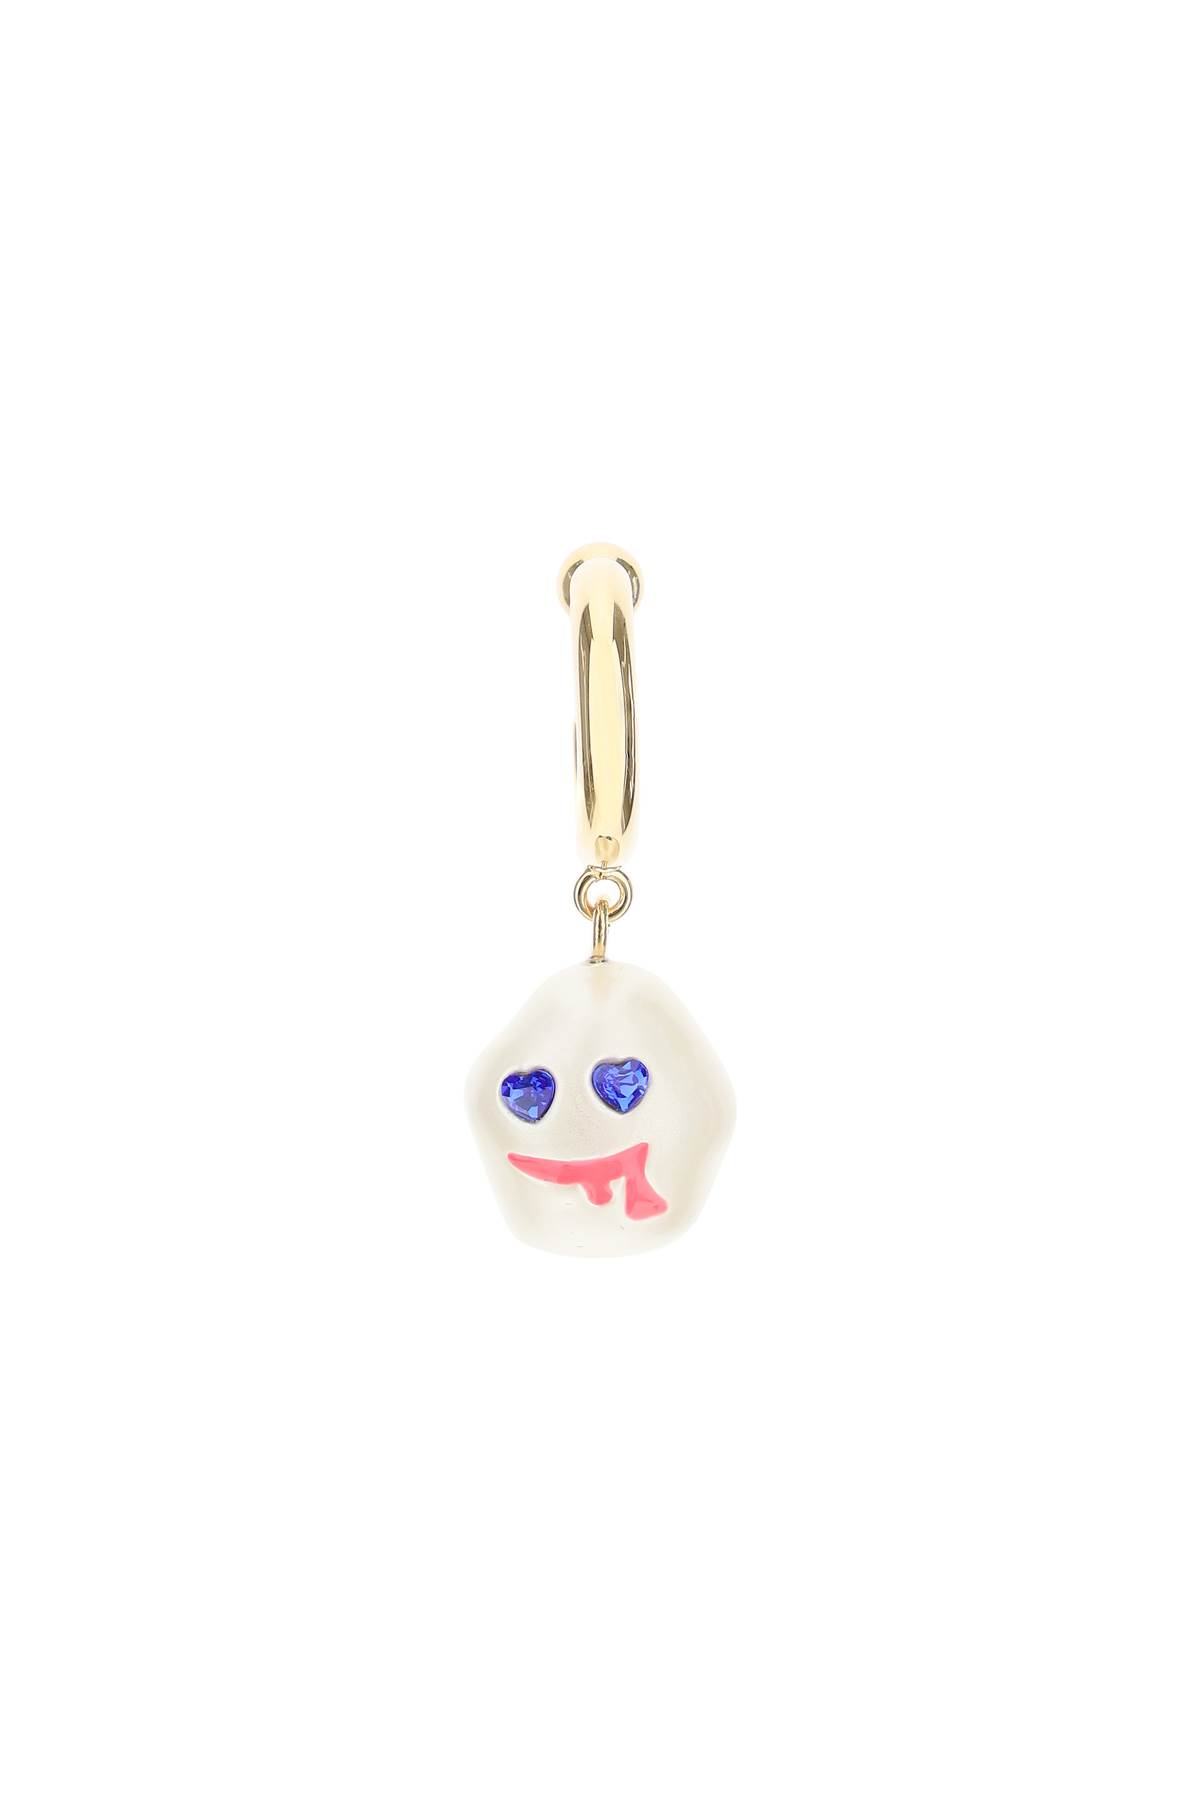 SafSafu Drooling Cotton Candy Single Earring